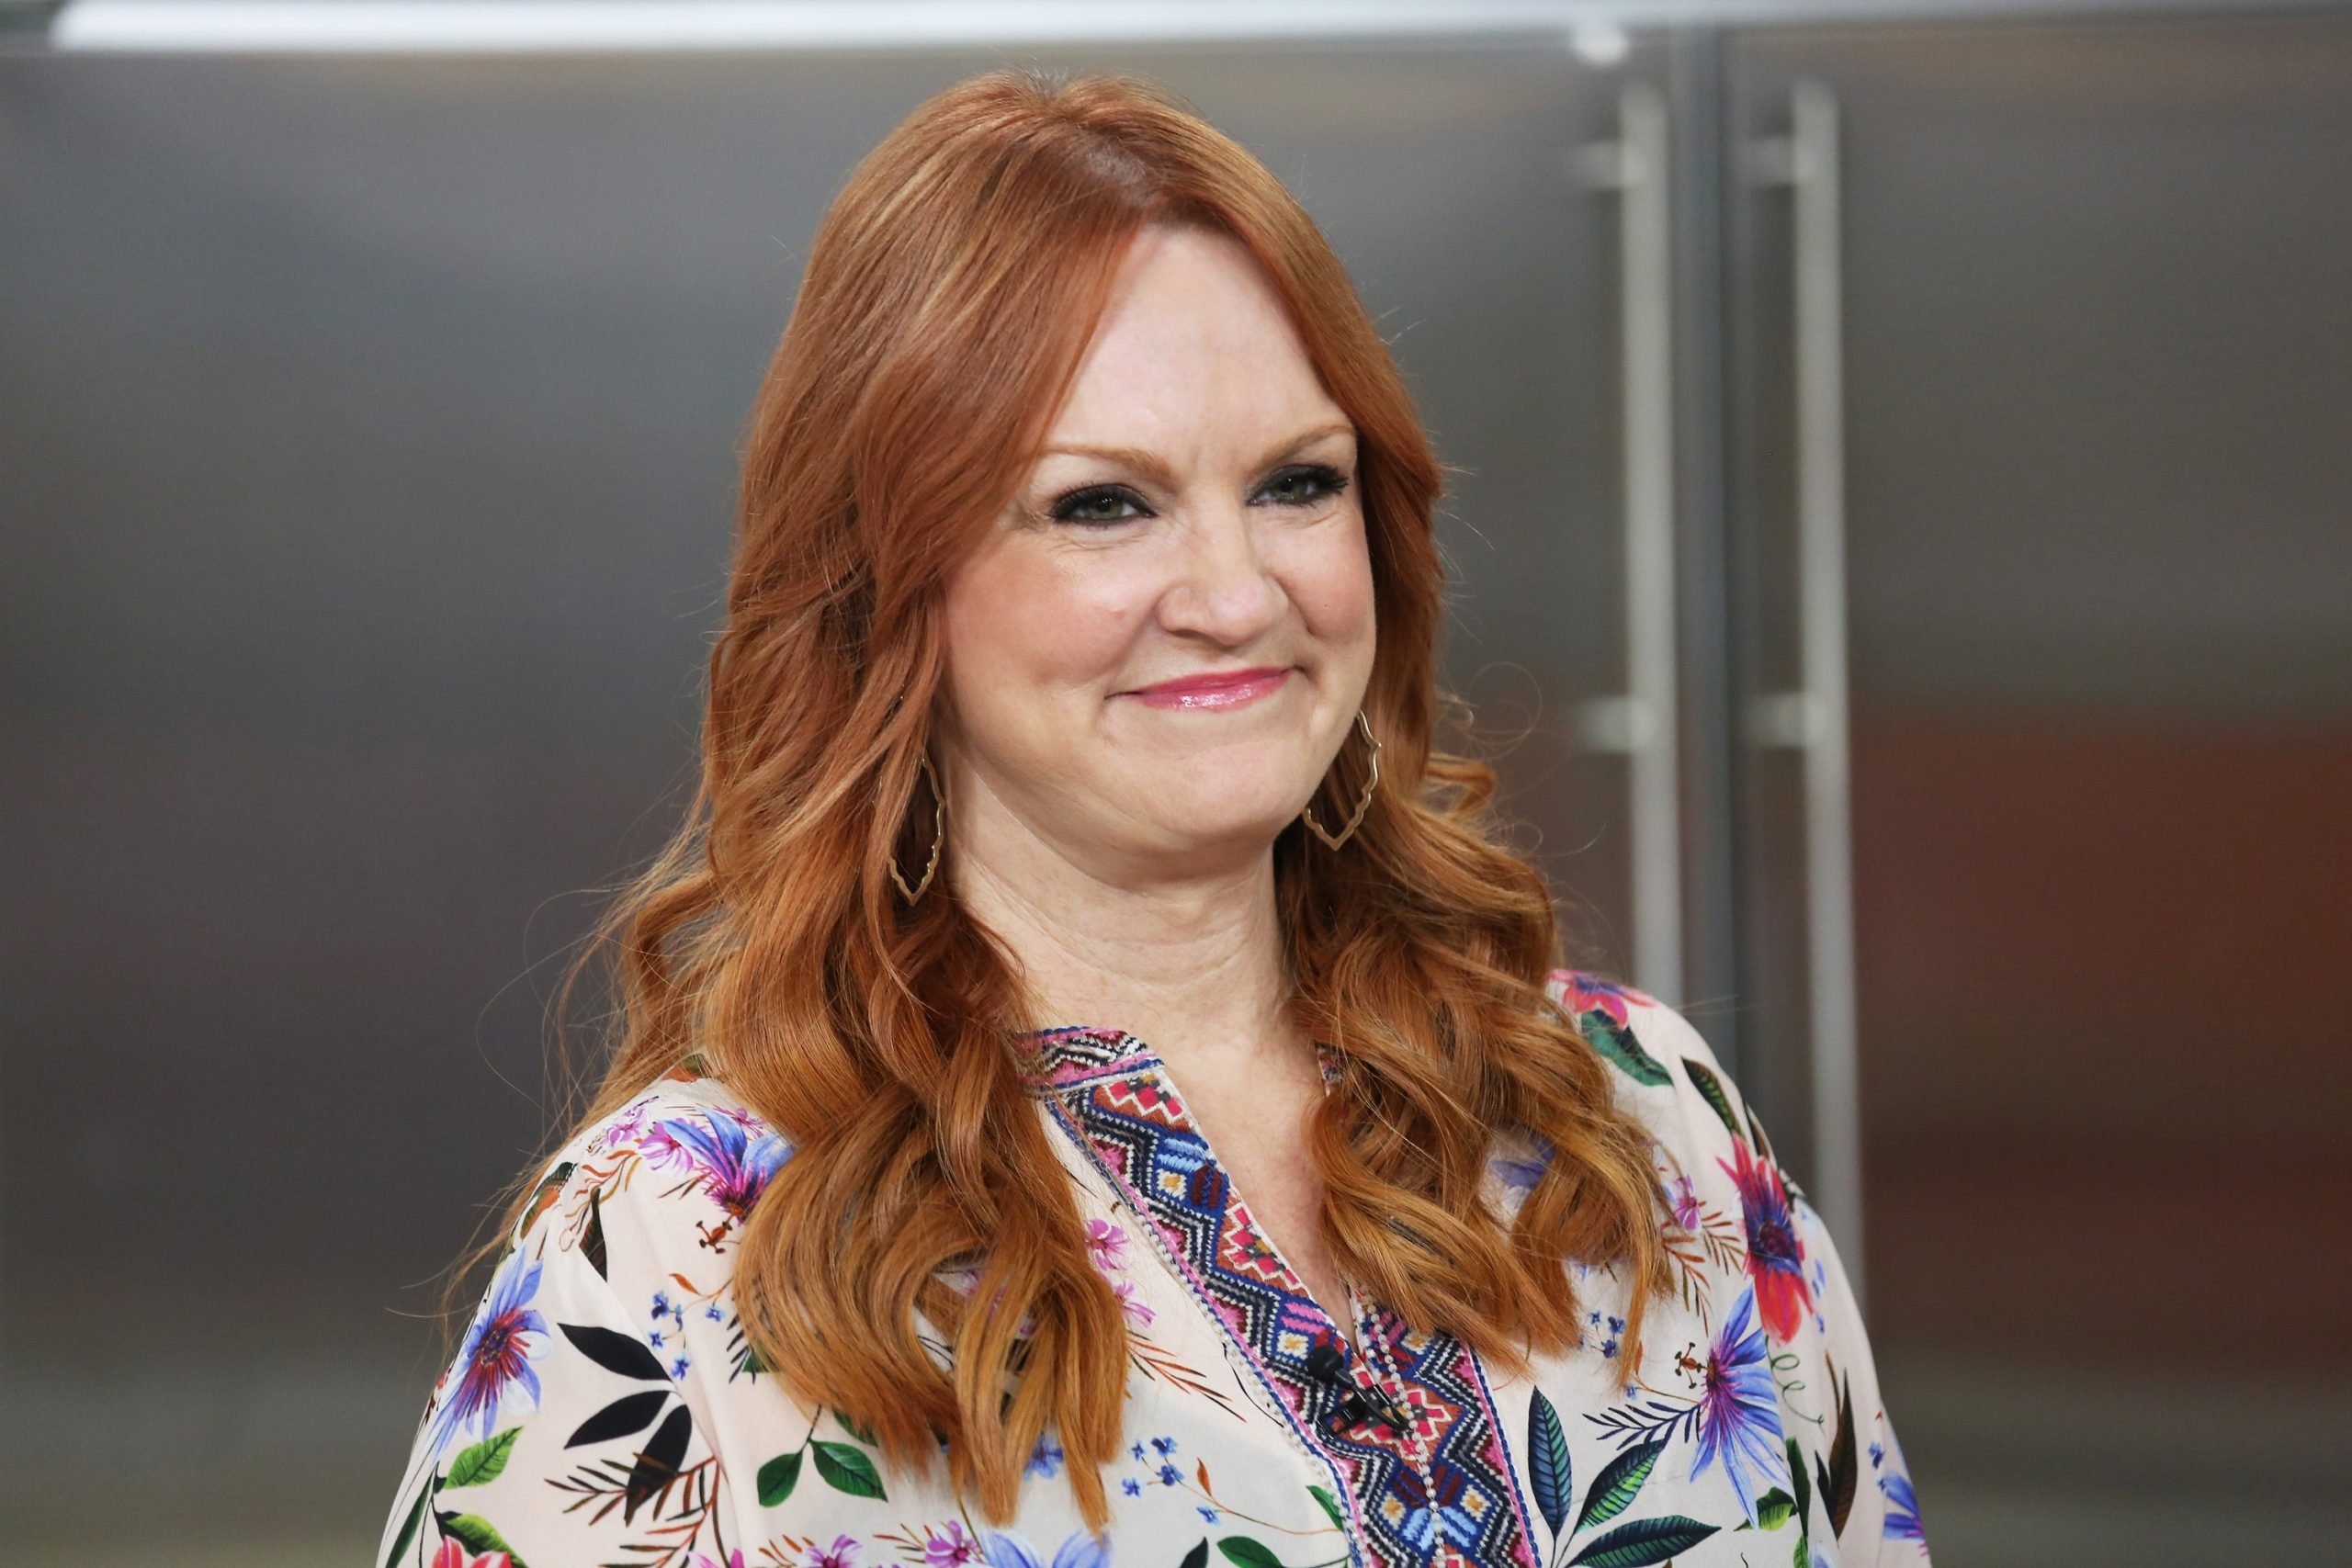 The Pioneer Woman Ree Drummond wears a floral shirt on the Today show.